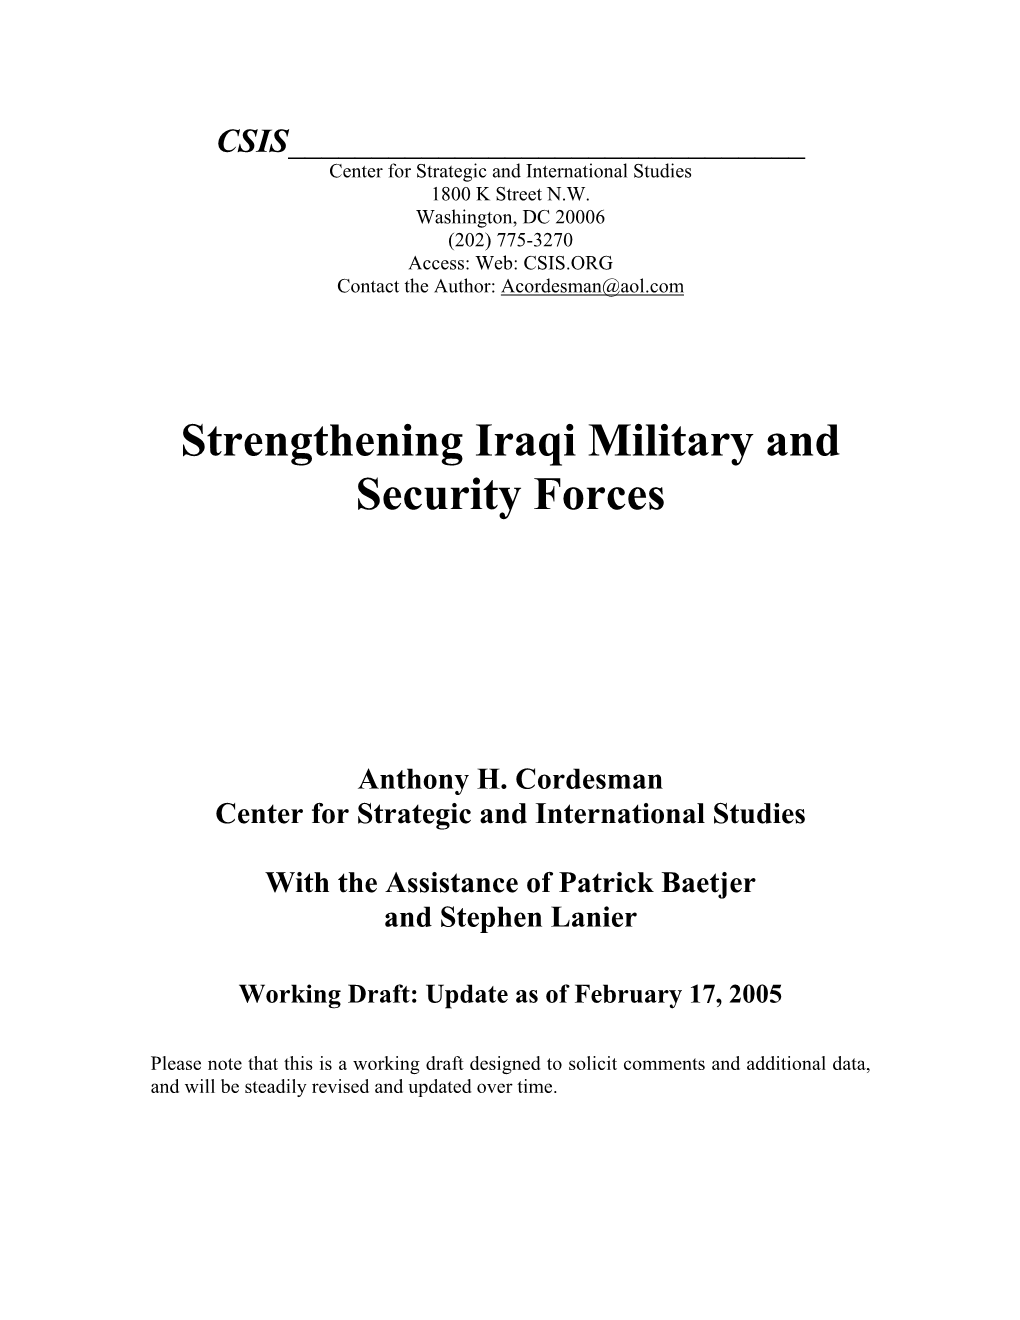 Strengthening Iraqi Military and Security Forces